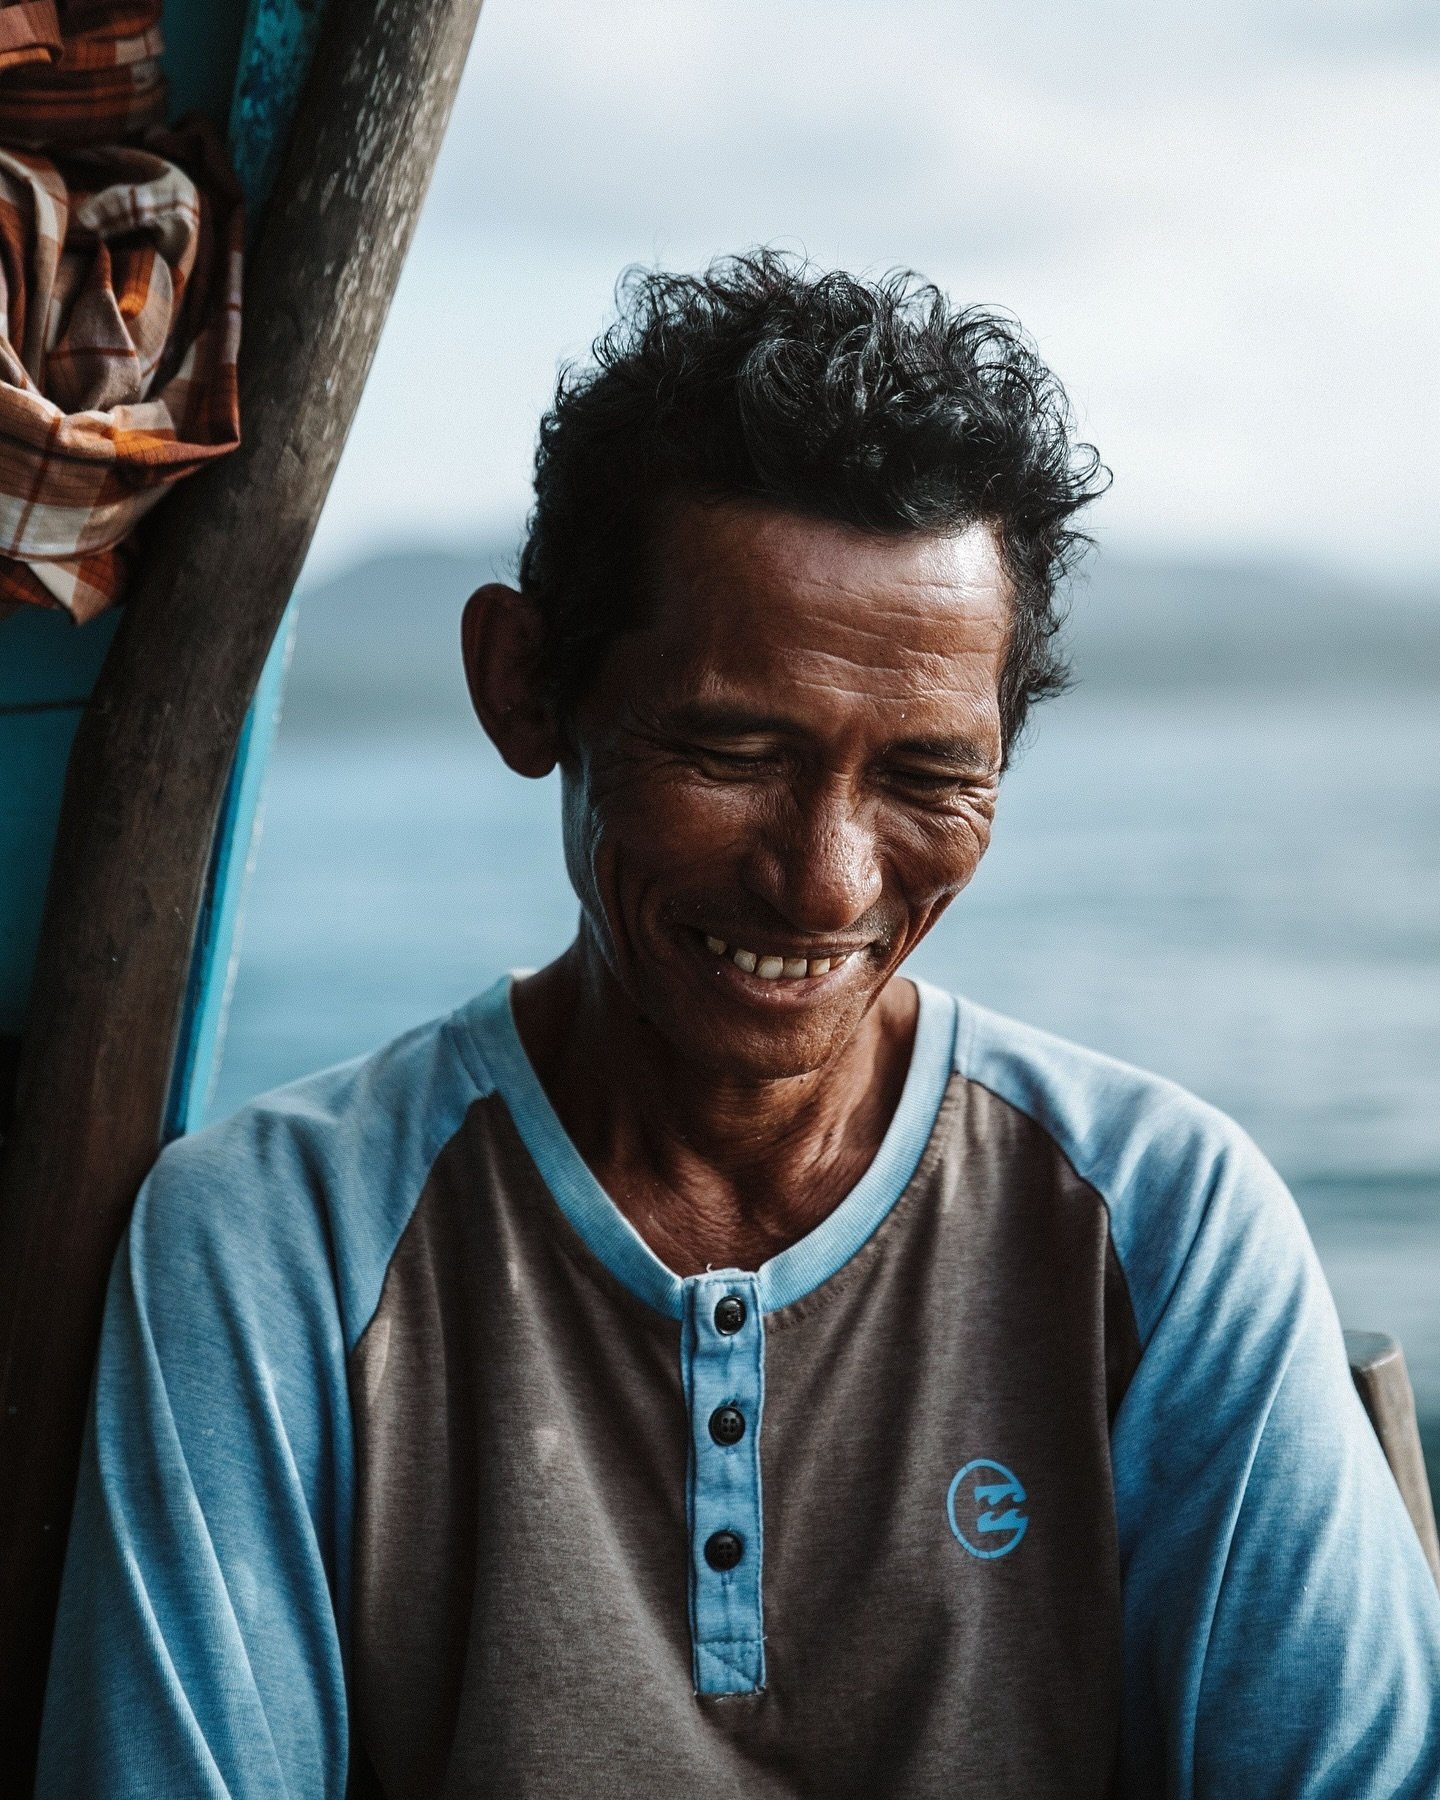 When Saat began fishing sharks, boats didn't have engines. That's a long life knowing only one occupation and one skill set you've mastered. The transition for him into tourism was harder than anyone's. If you're joining us in Indonesia over the next